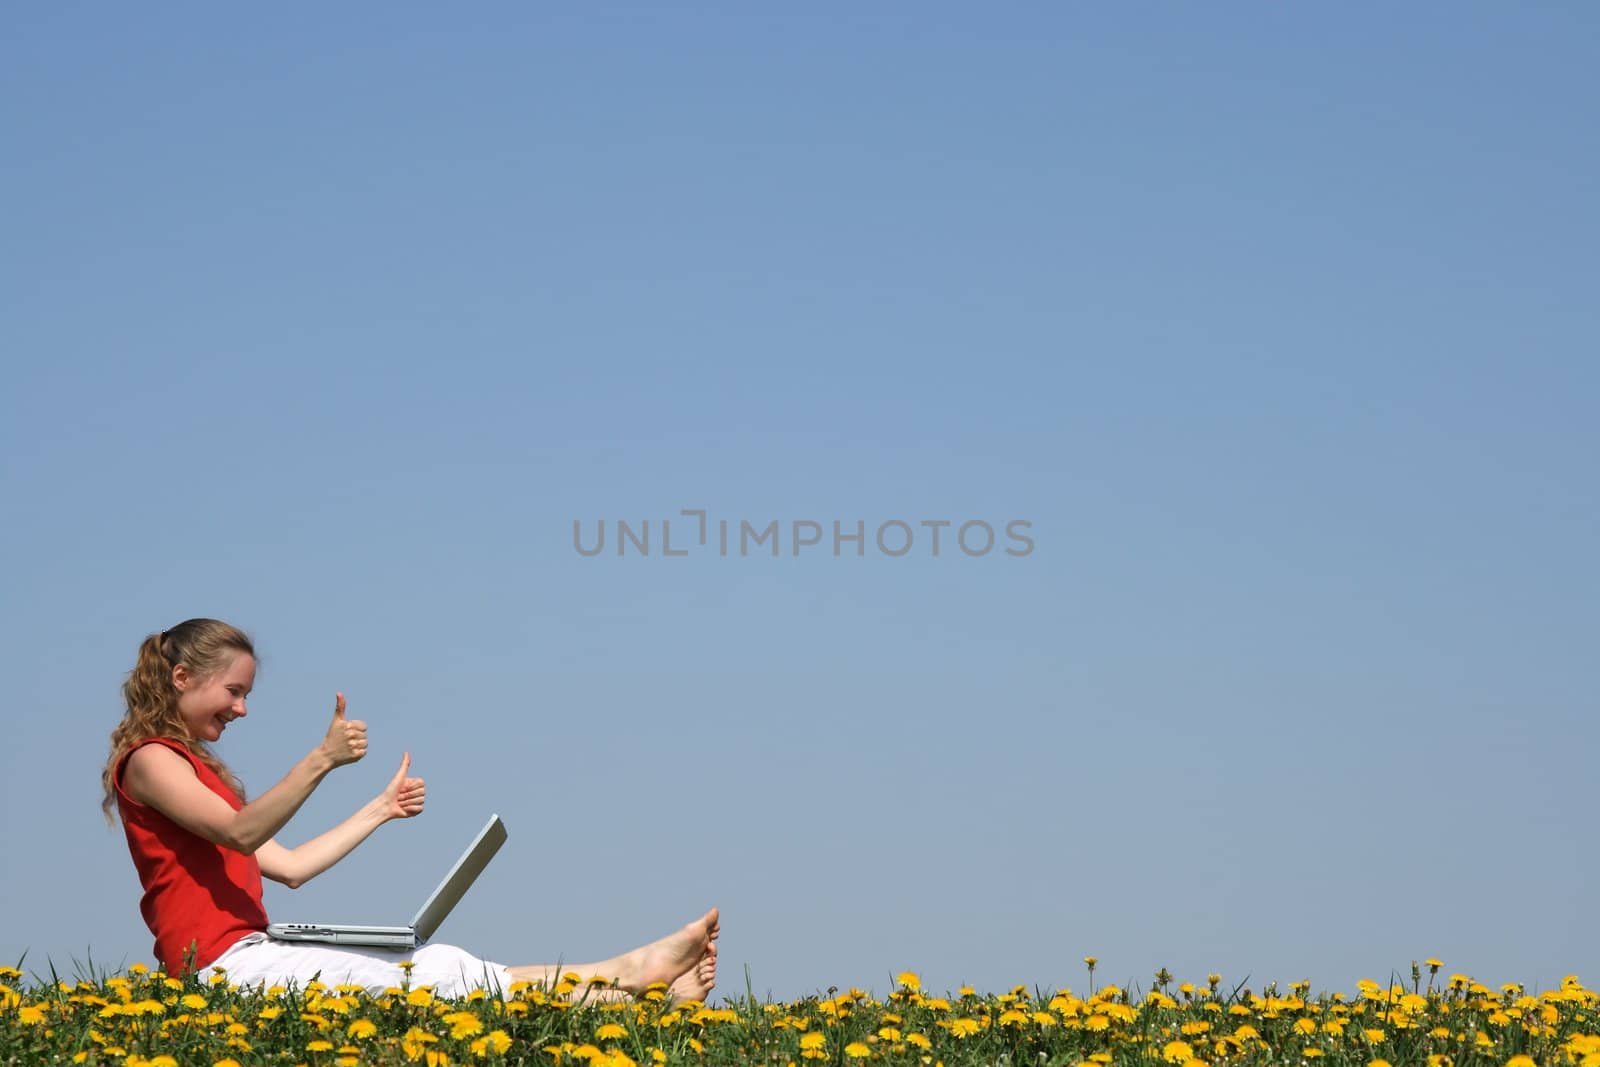 Thumbs up! Smiling girl with laptop in a flowering field.